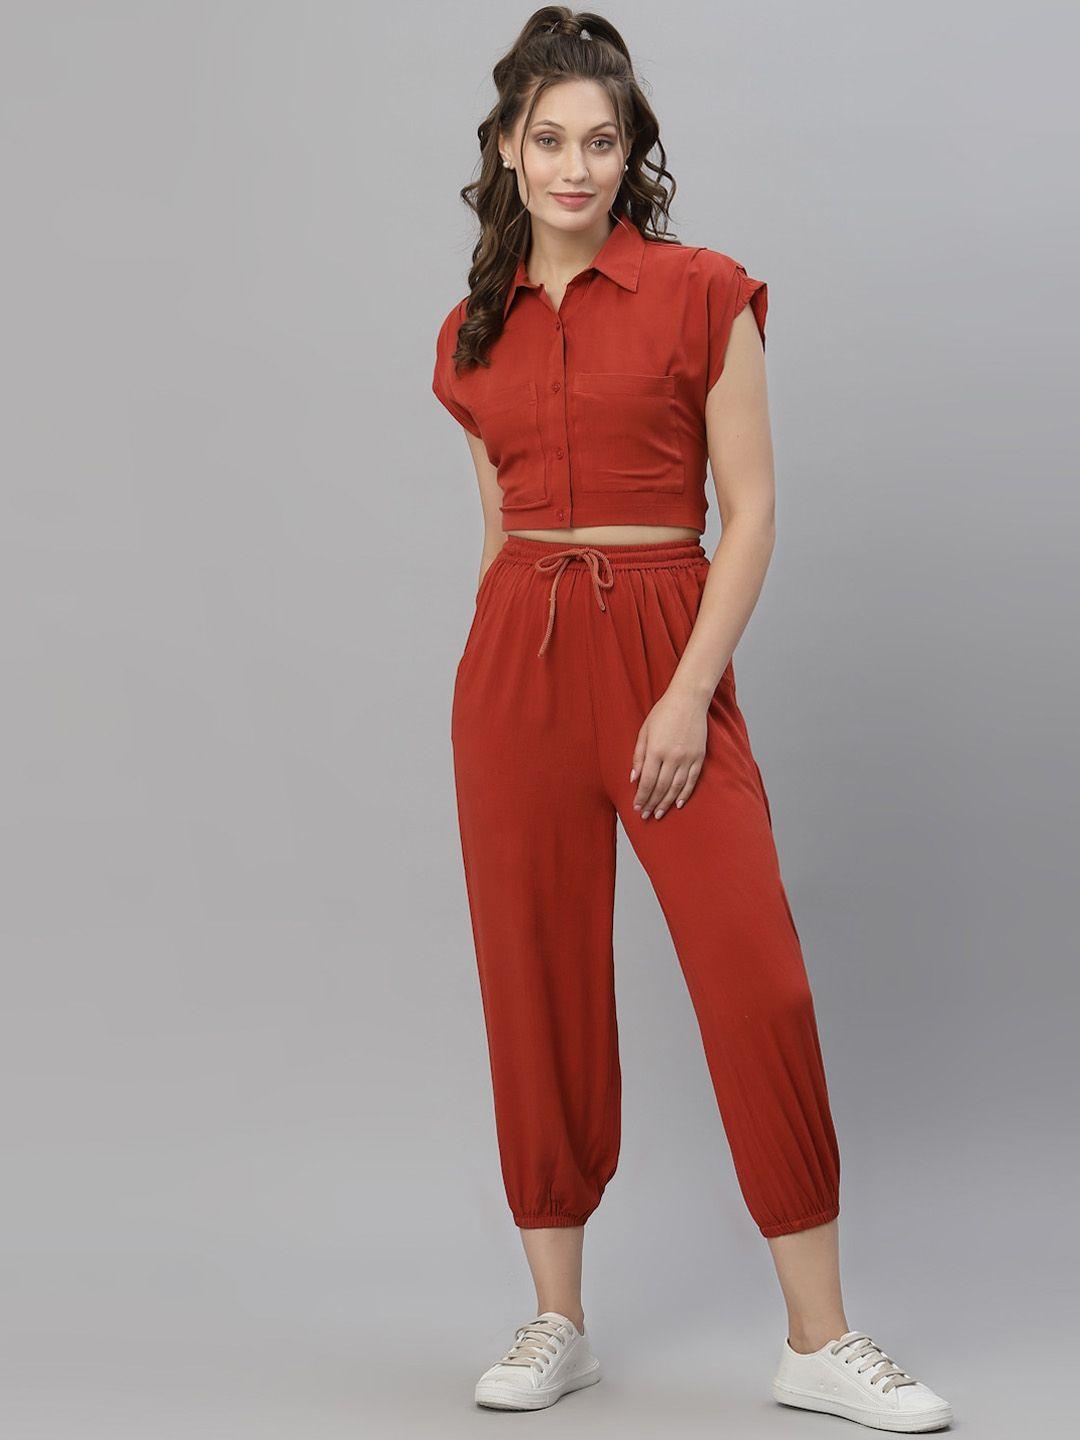 kassually women rust solid co-ords set